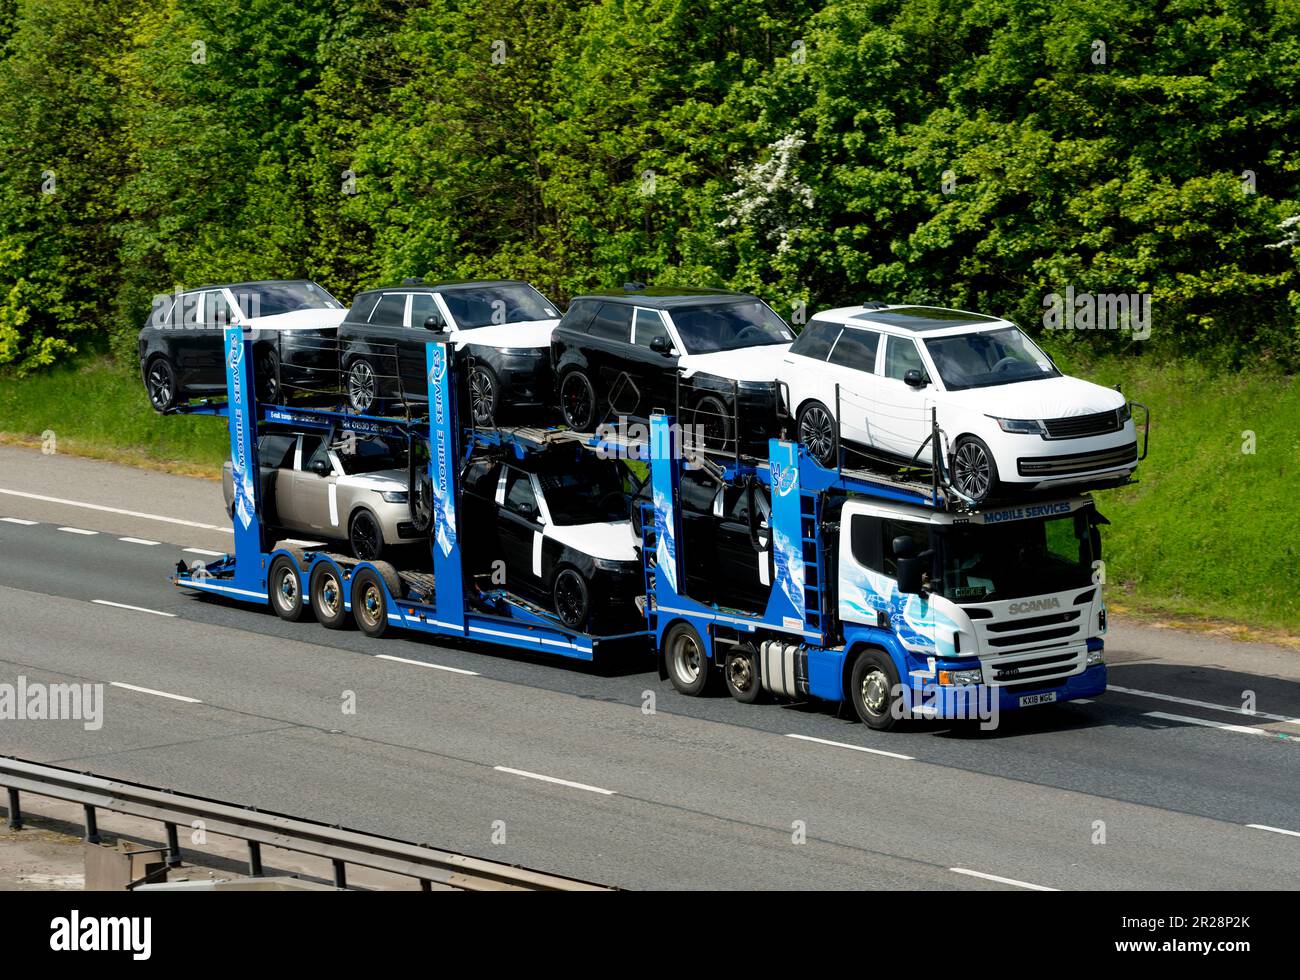 Mobile Services transporter lorry carrying new Land Rover cars on the M40 motorway, Warwickshire, UK Stock Photo